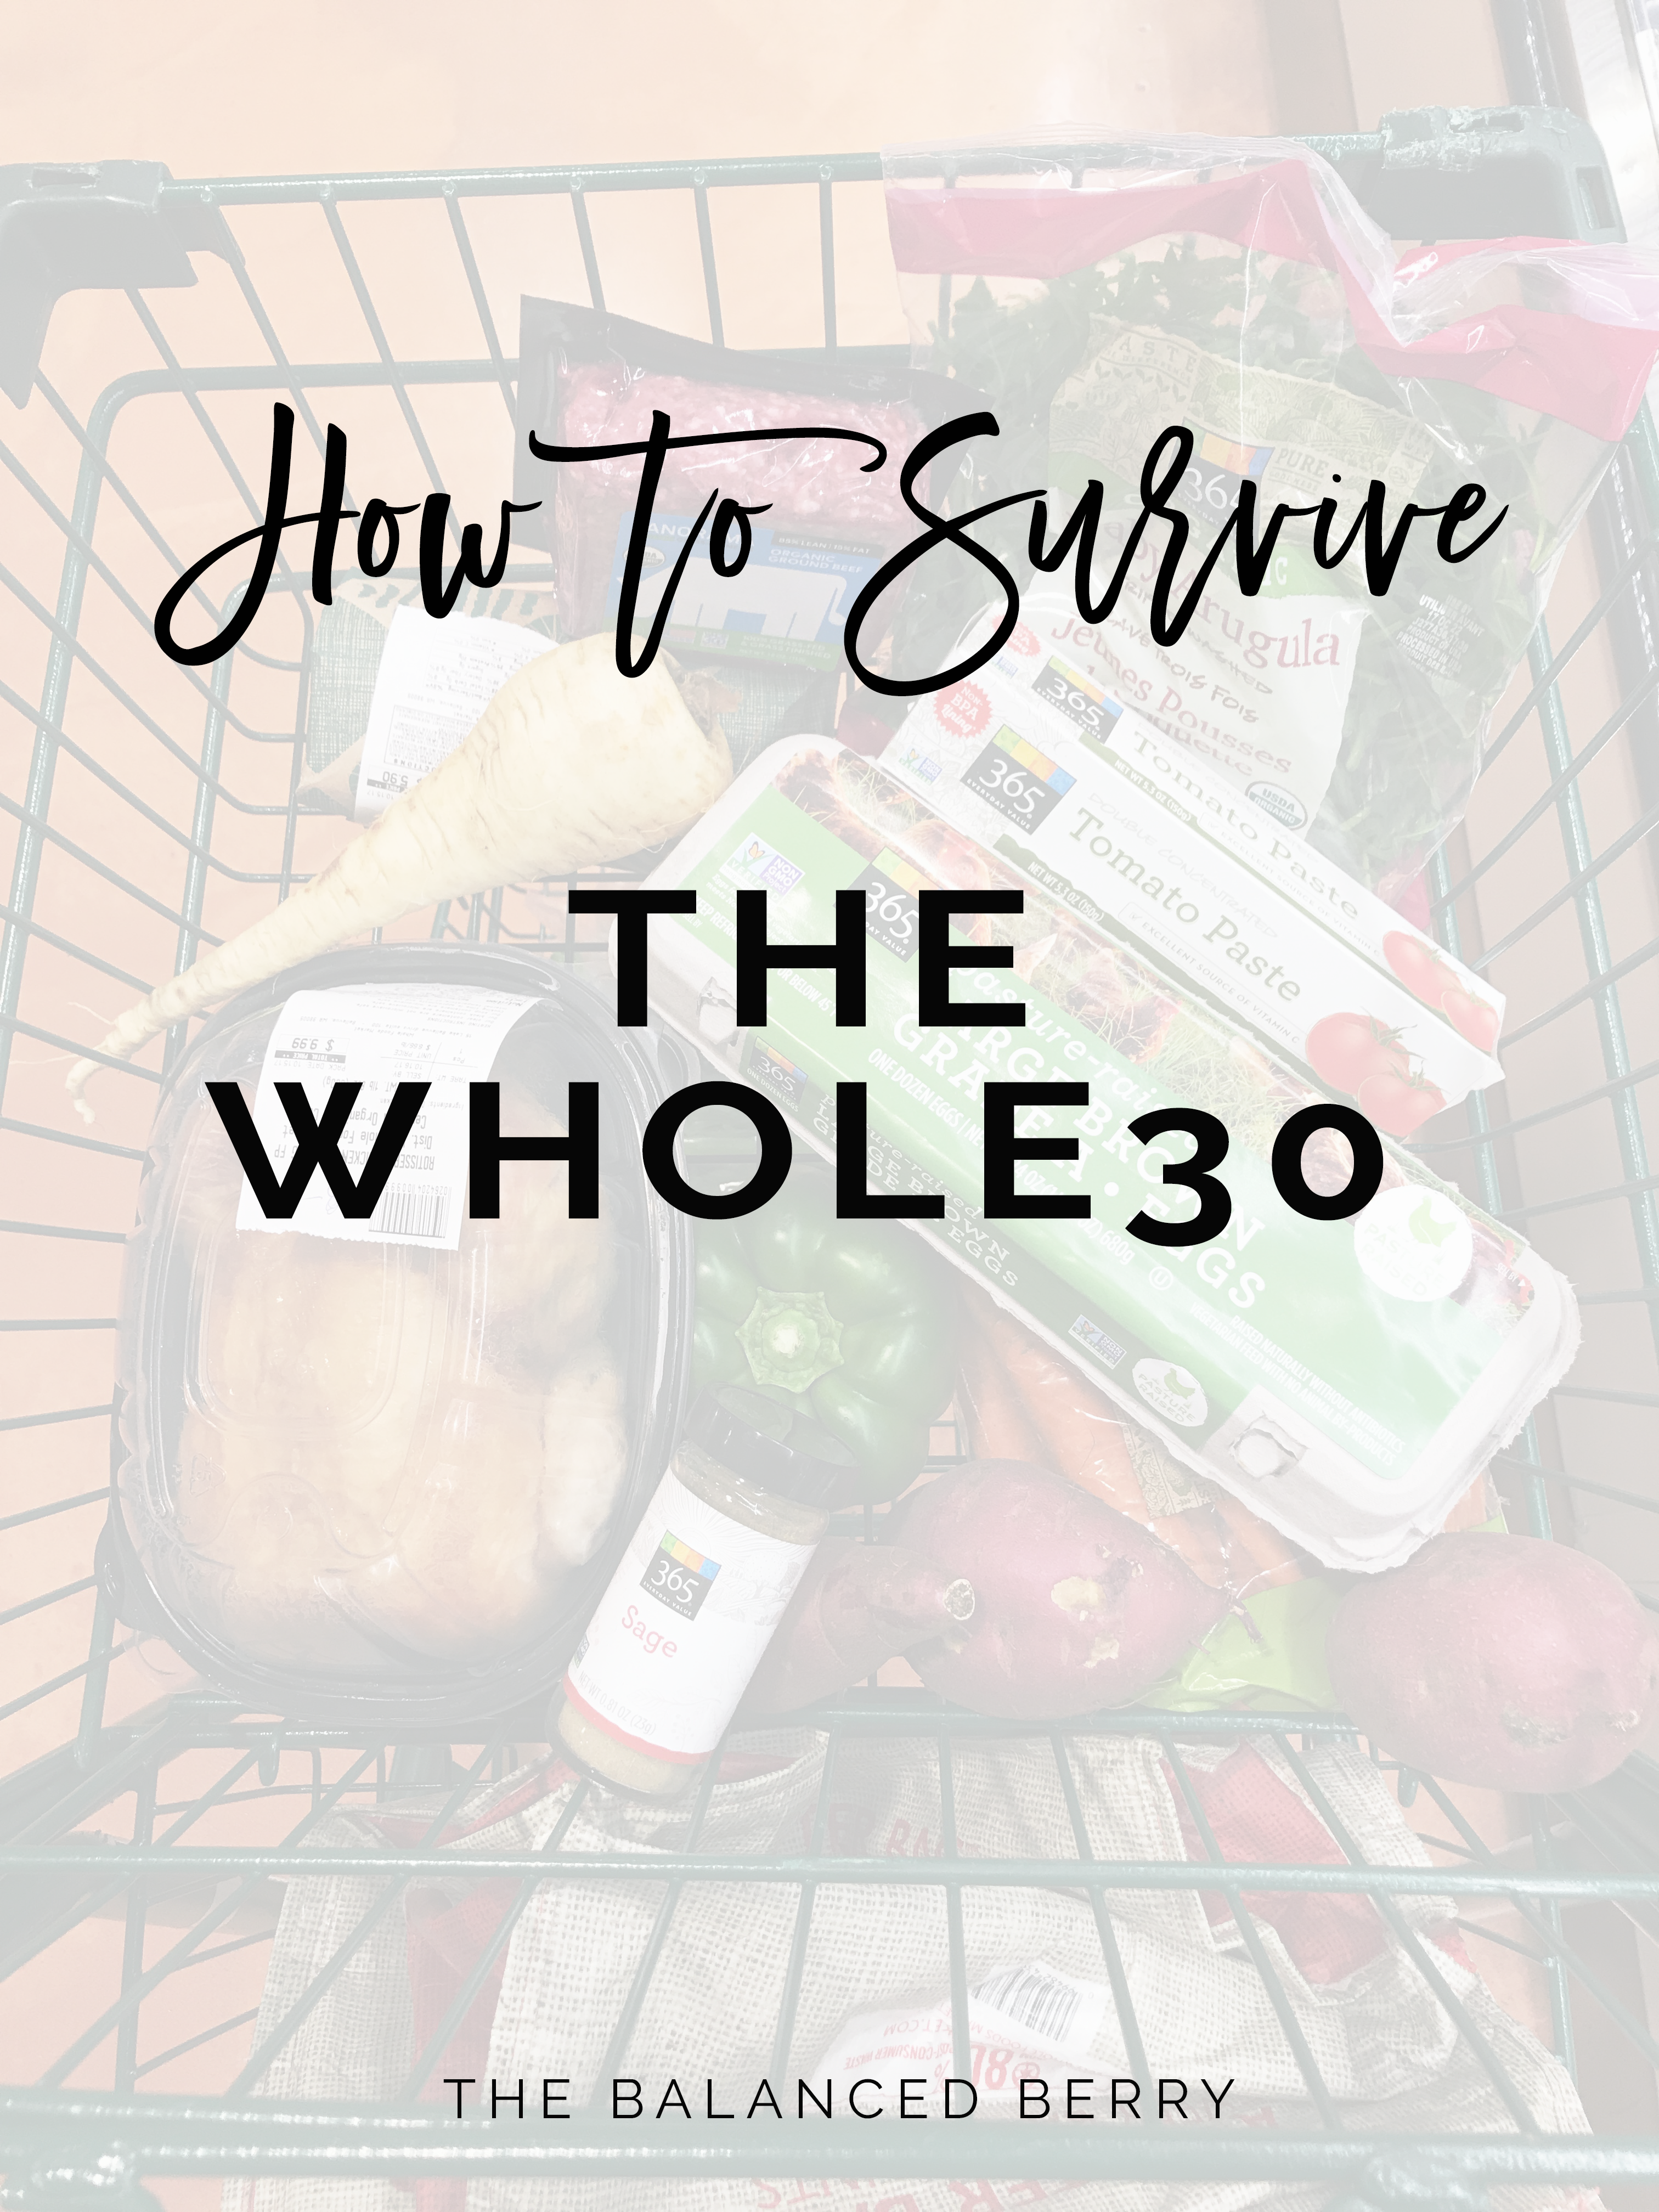 Tackling the Whole30? Here are 10 real-life tips to help you get through it.